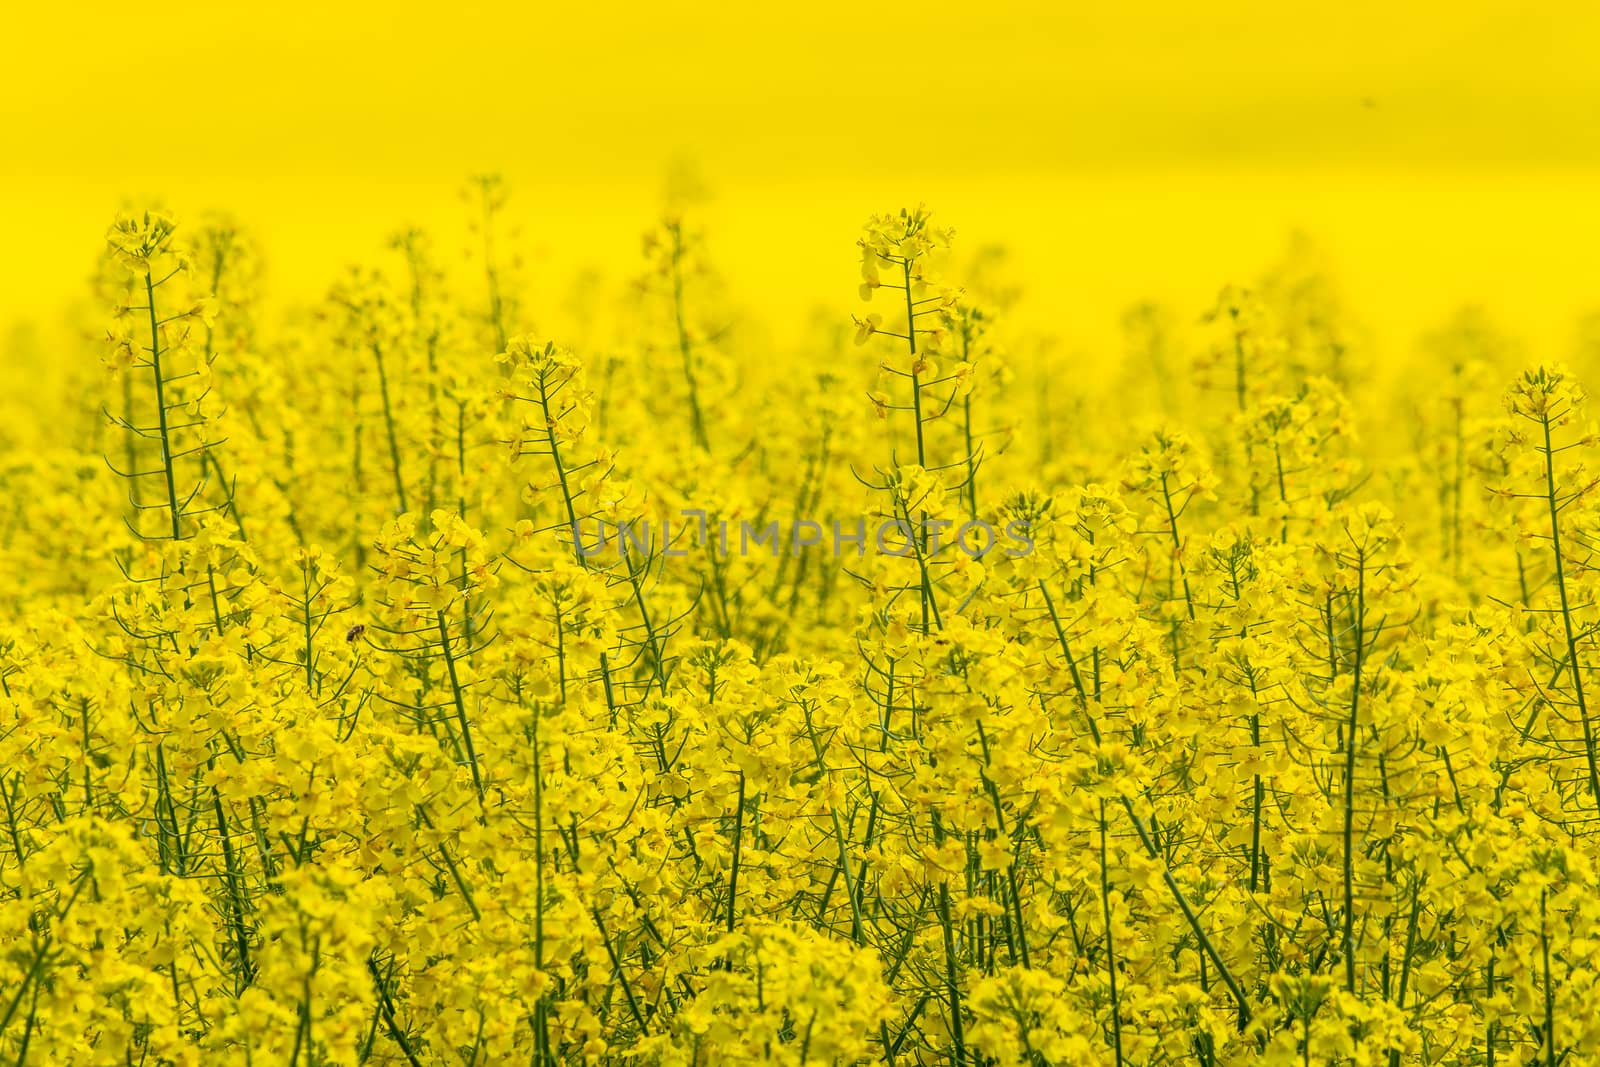 Blooming canola field with beautiful blue sky in the background.
Symbolizing green energy.